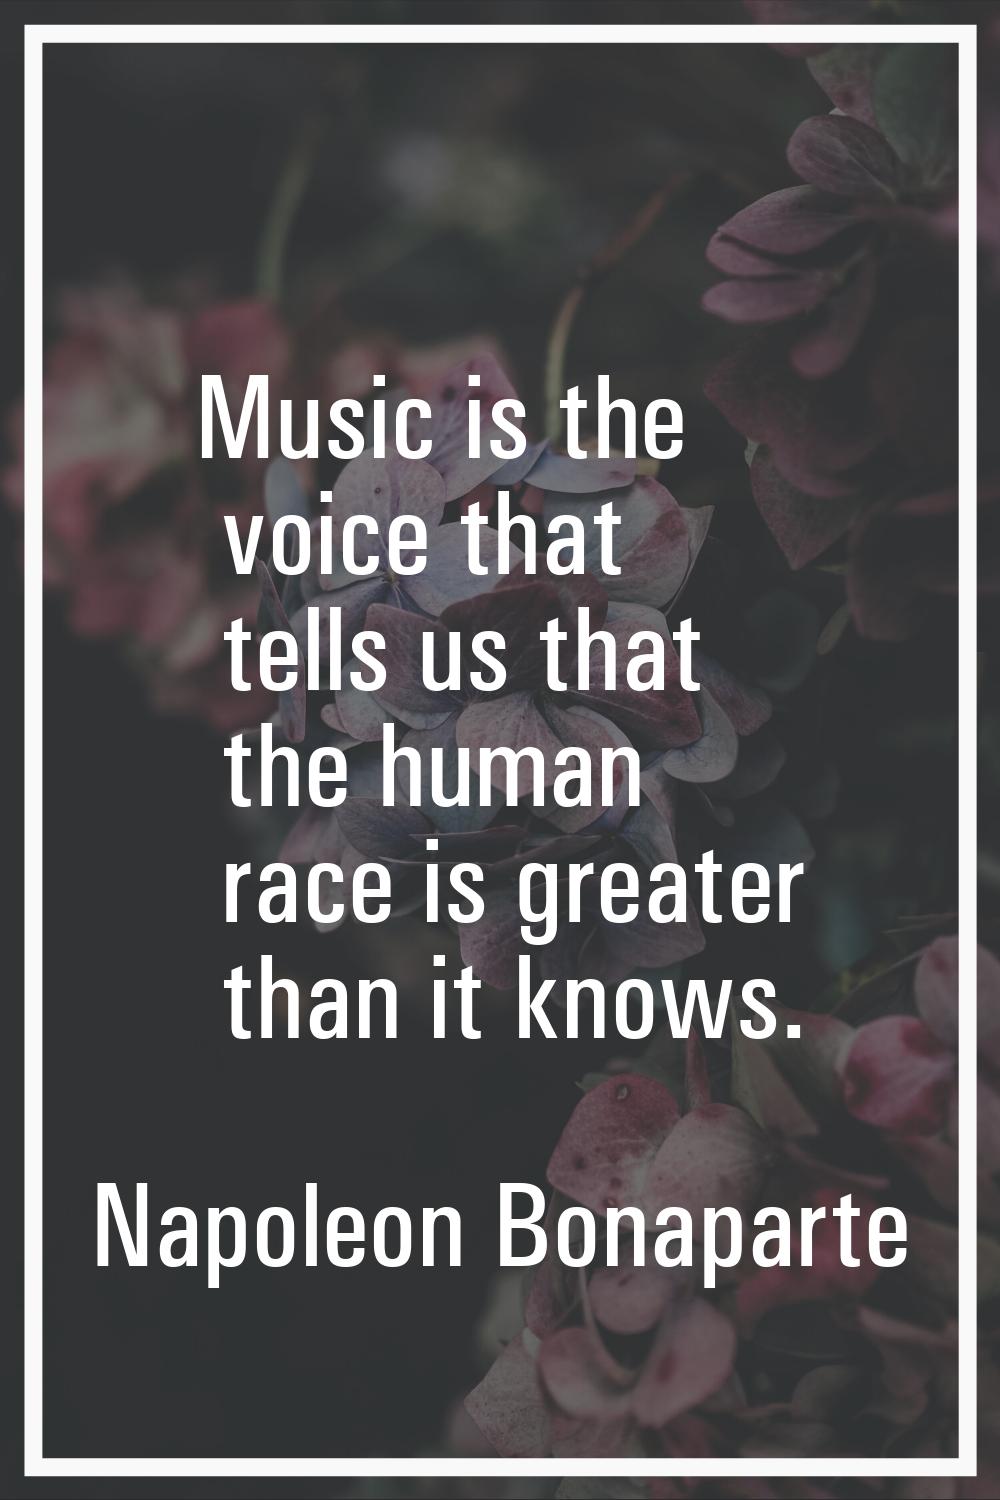 Music is the voice that tells us that the human race is greater than it knows.